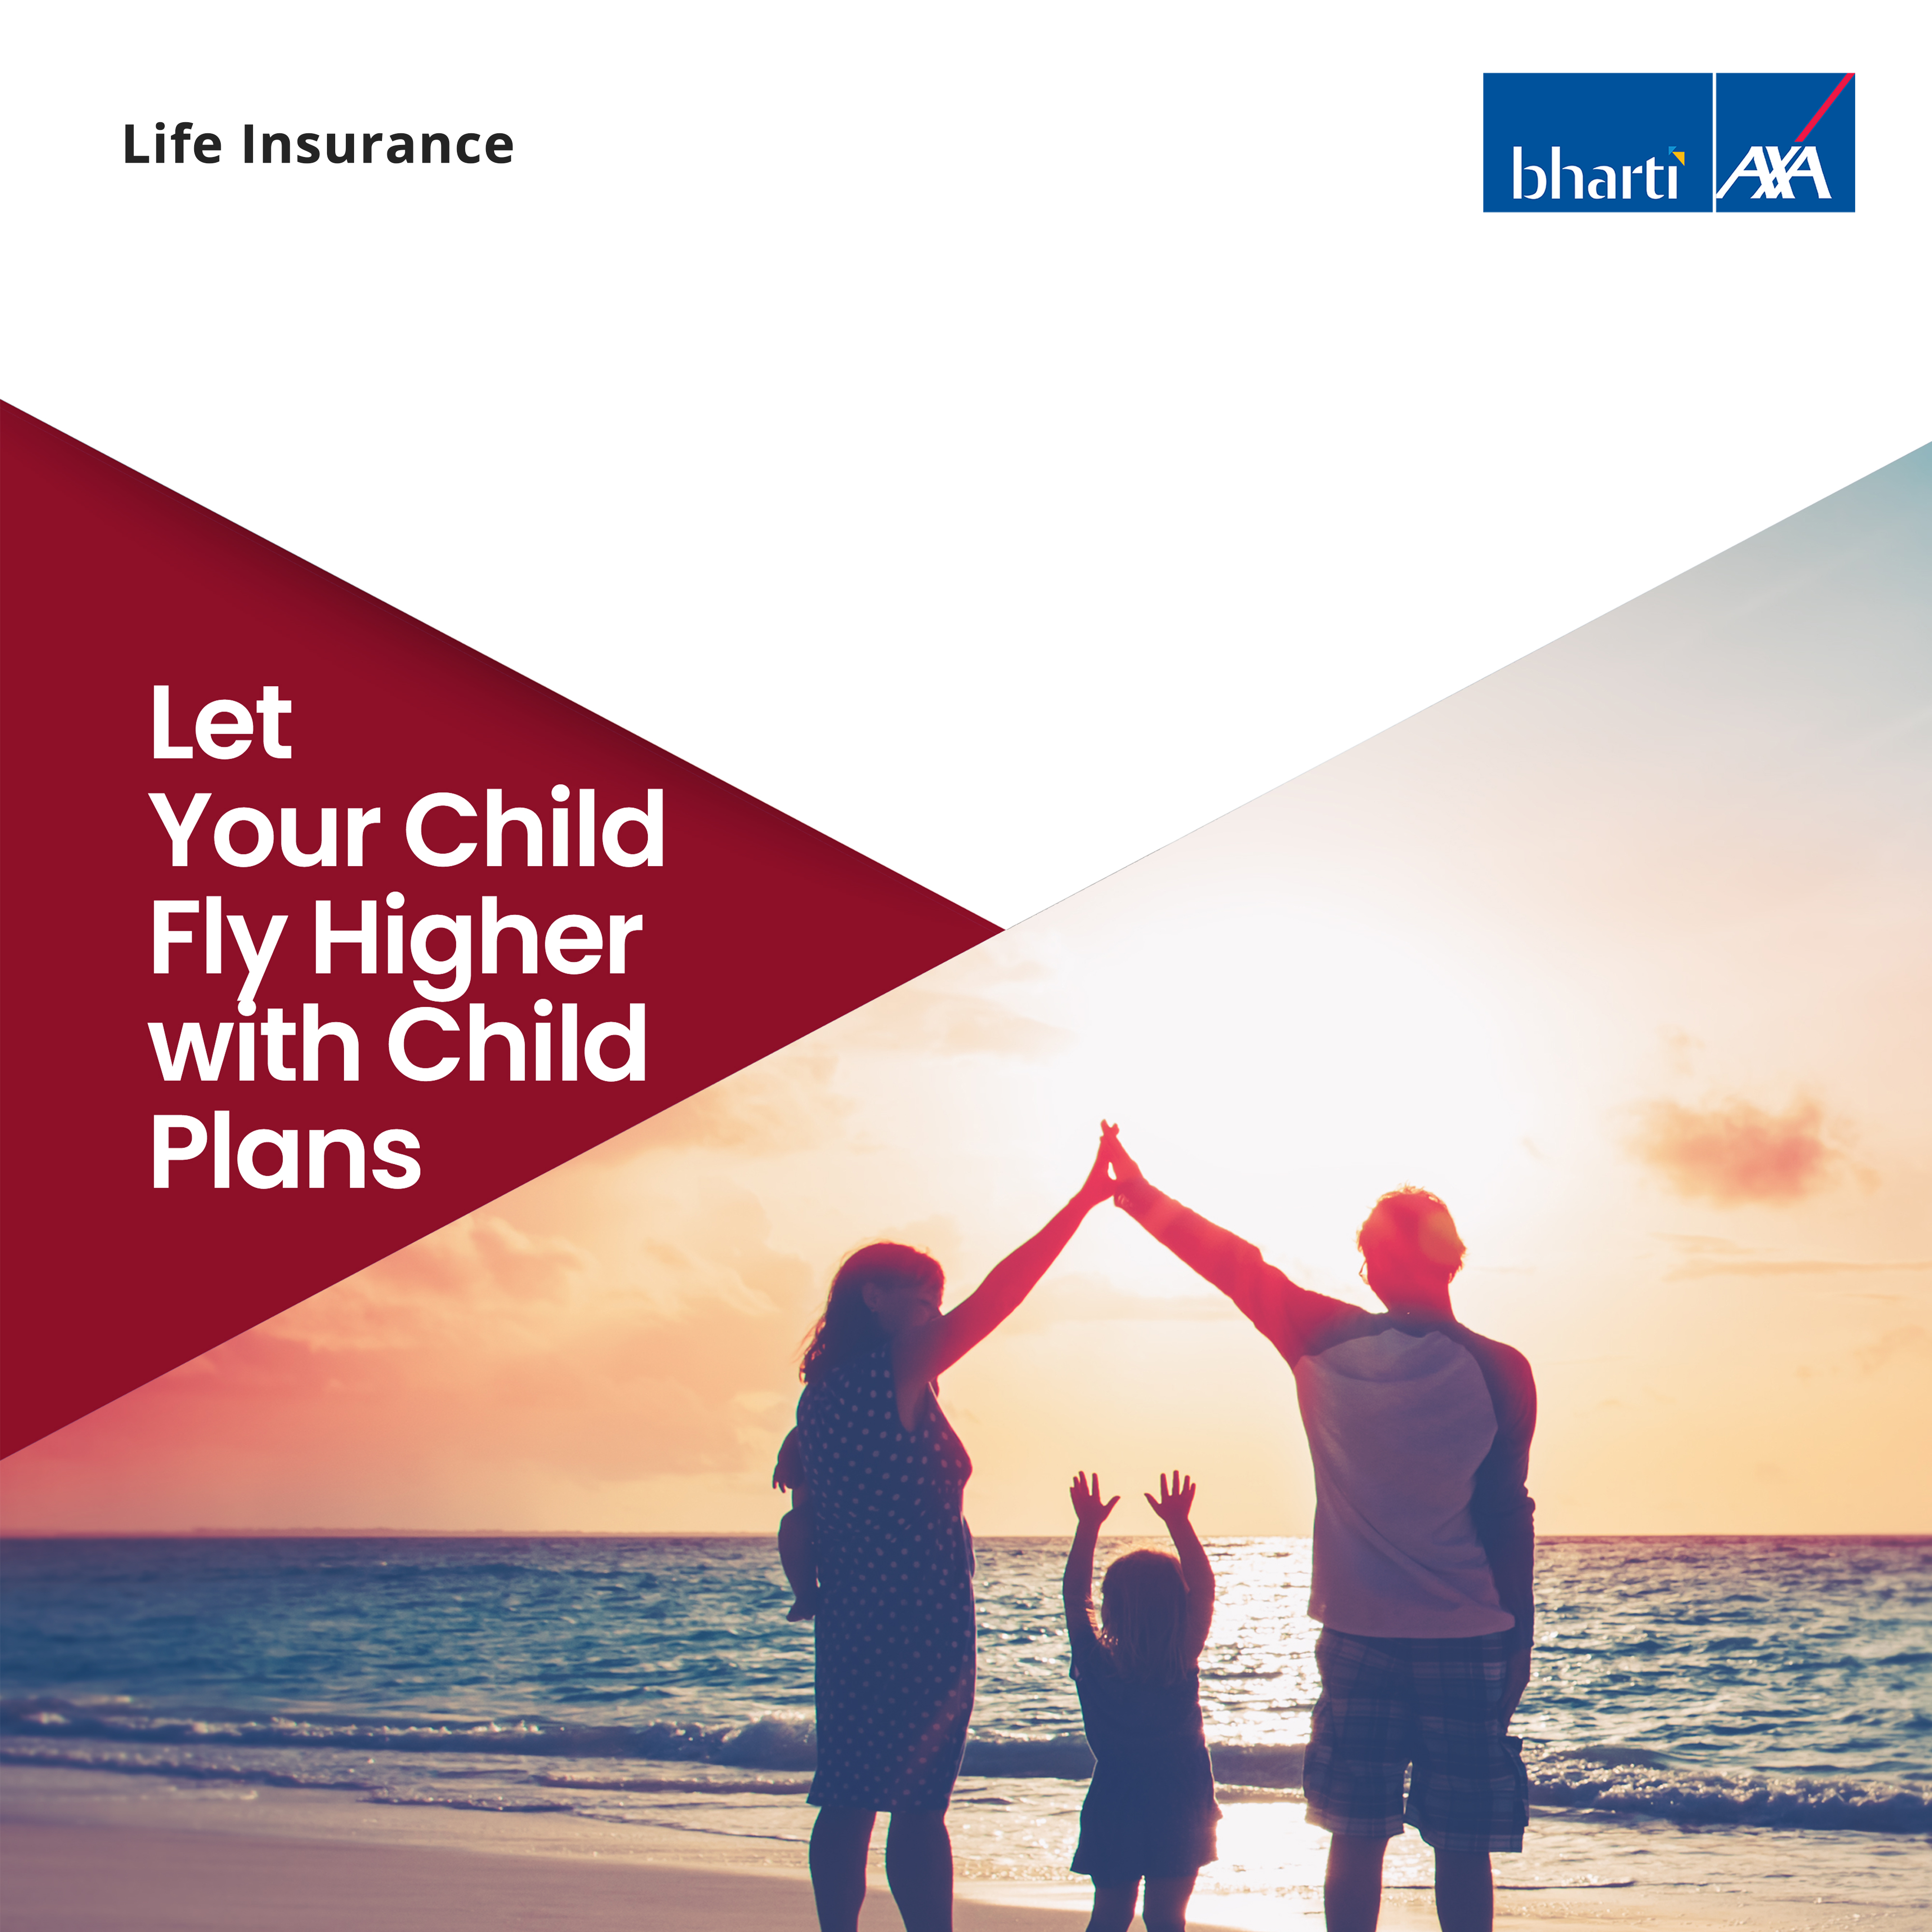 Let Your Child Fly Higher With Child Plans